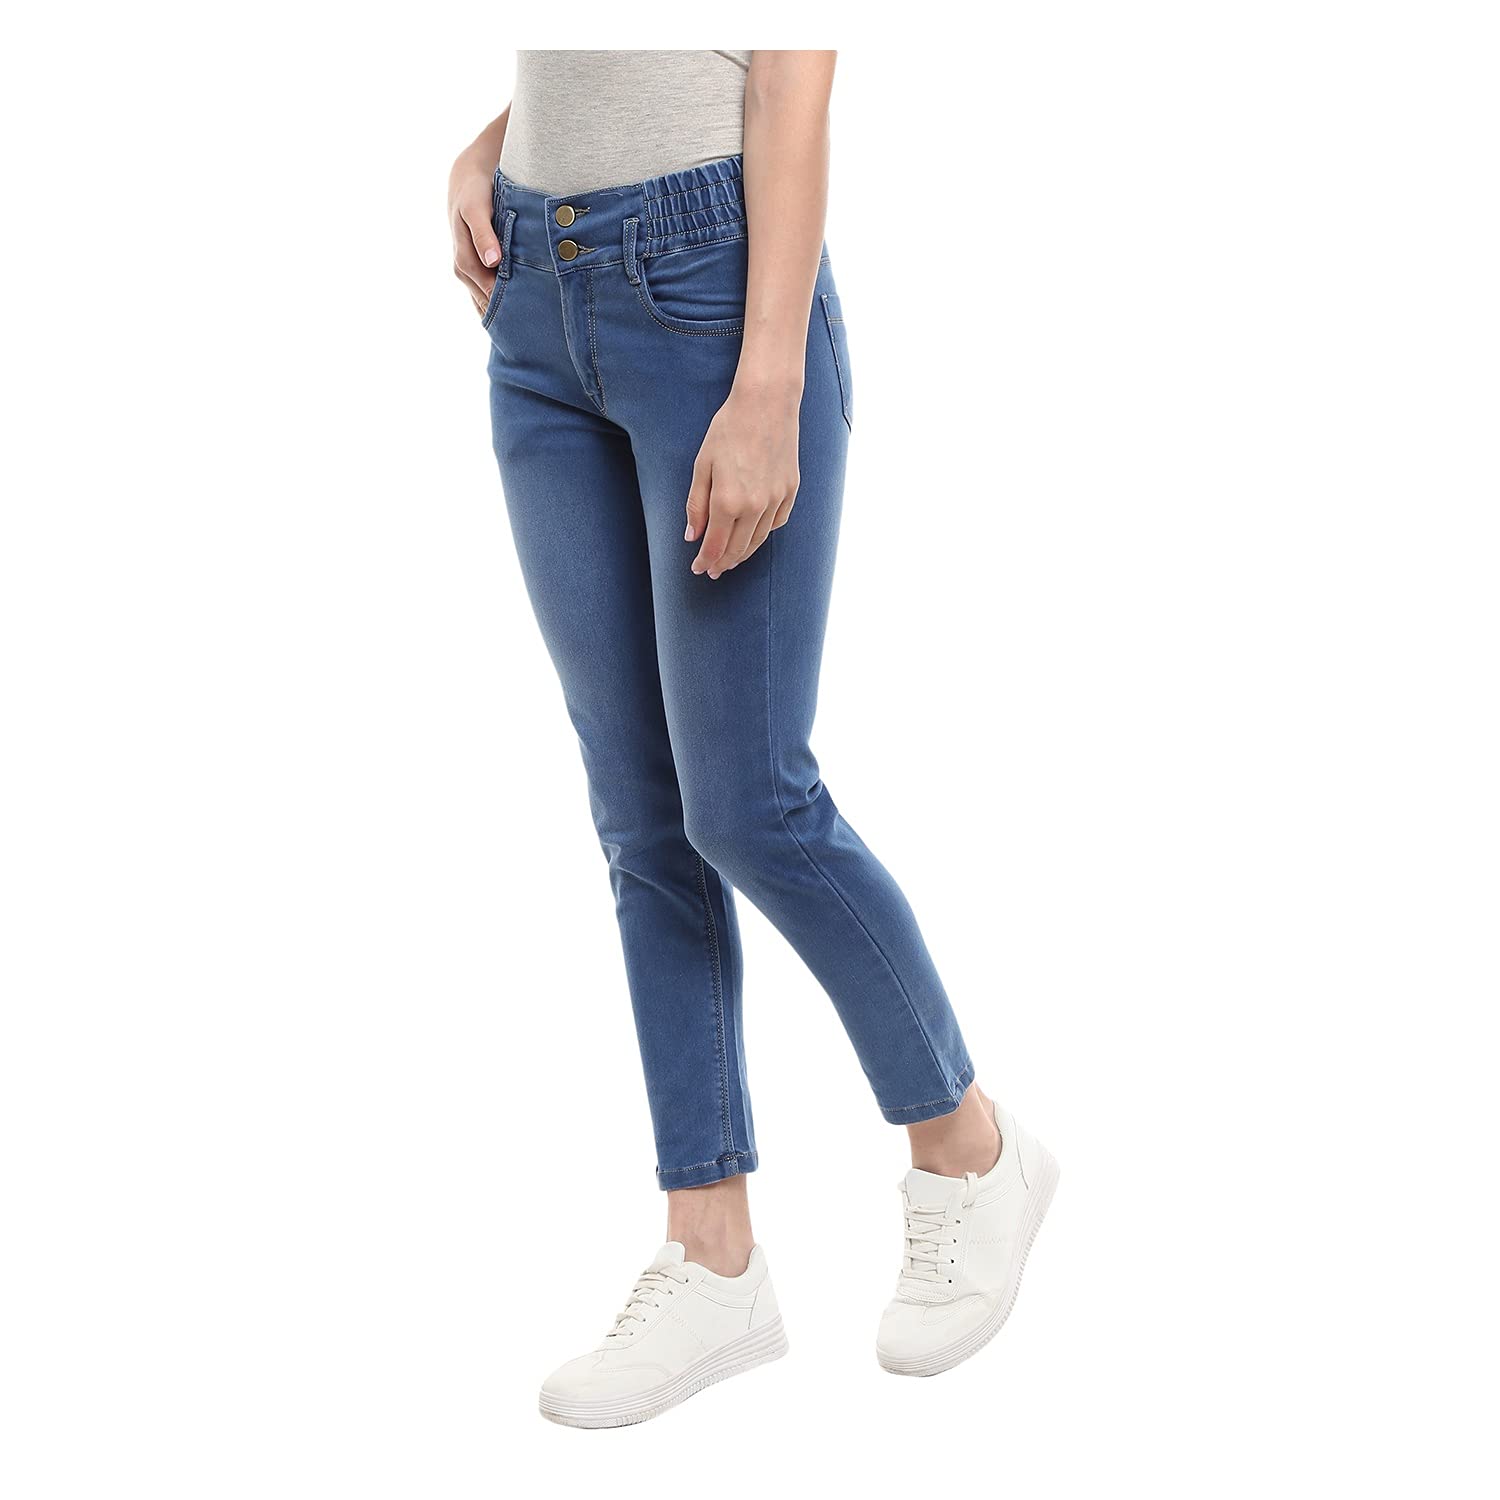 VMart Women Solid Cotton Polyester Knitted Denim High Rise Jeans 433991